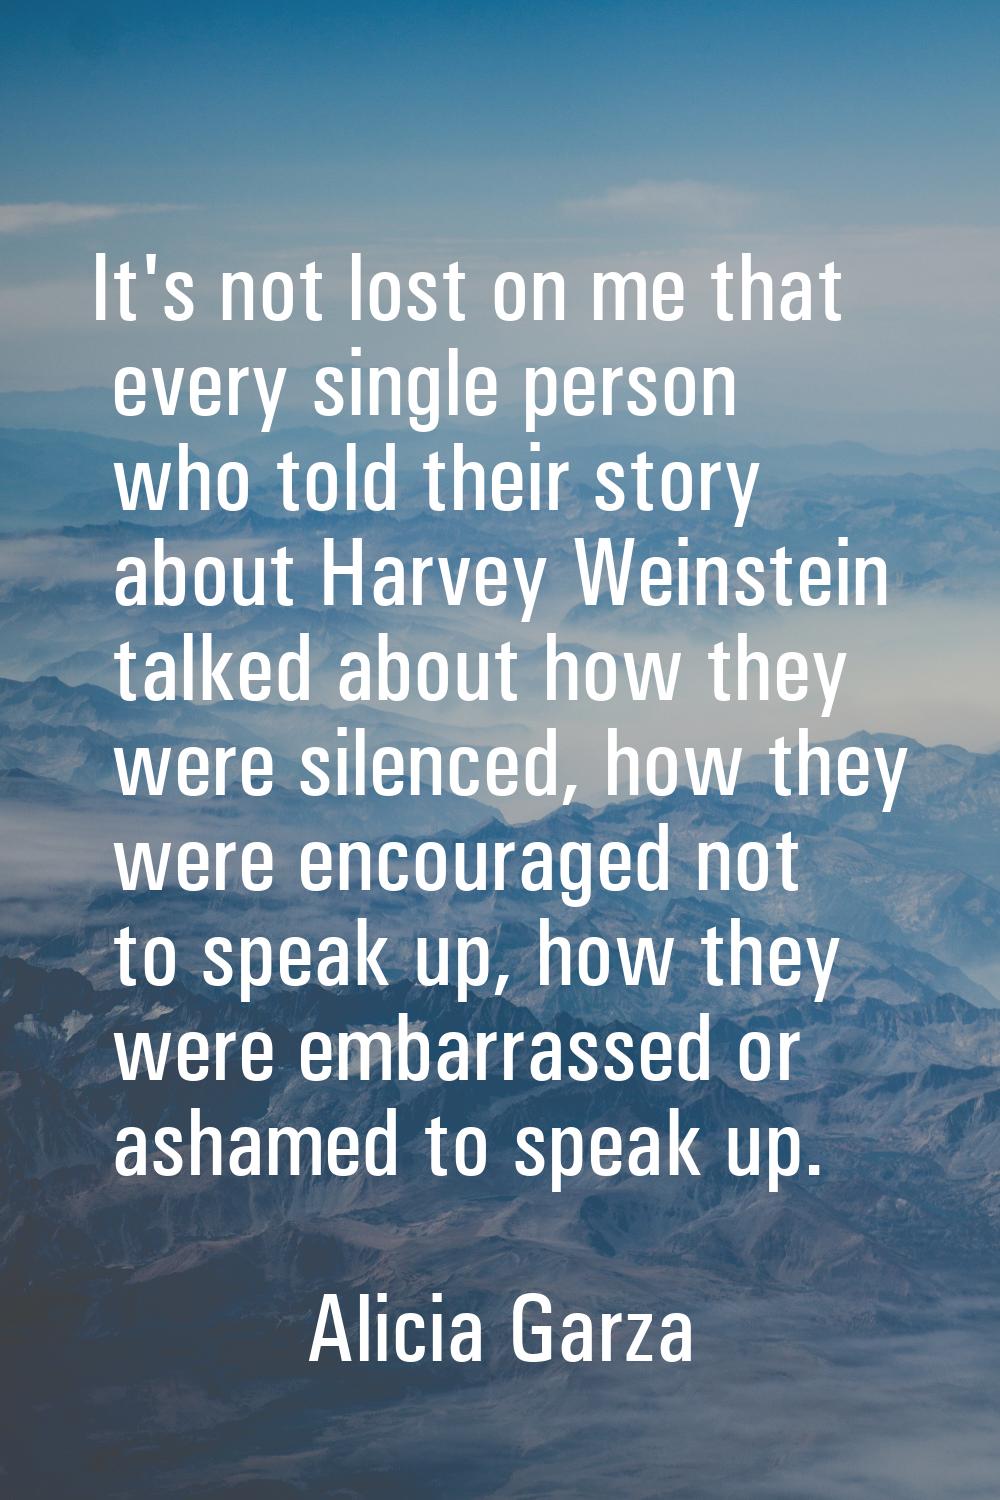 It's not lost on me that every single person who told their story about Harvey Weinstein talked abo